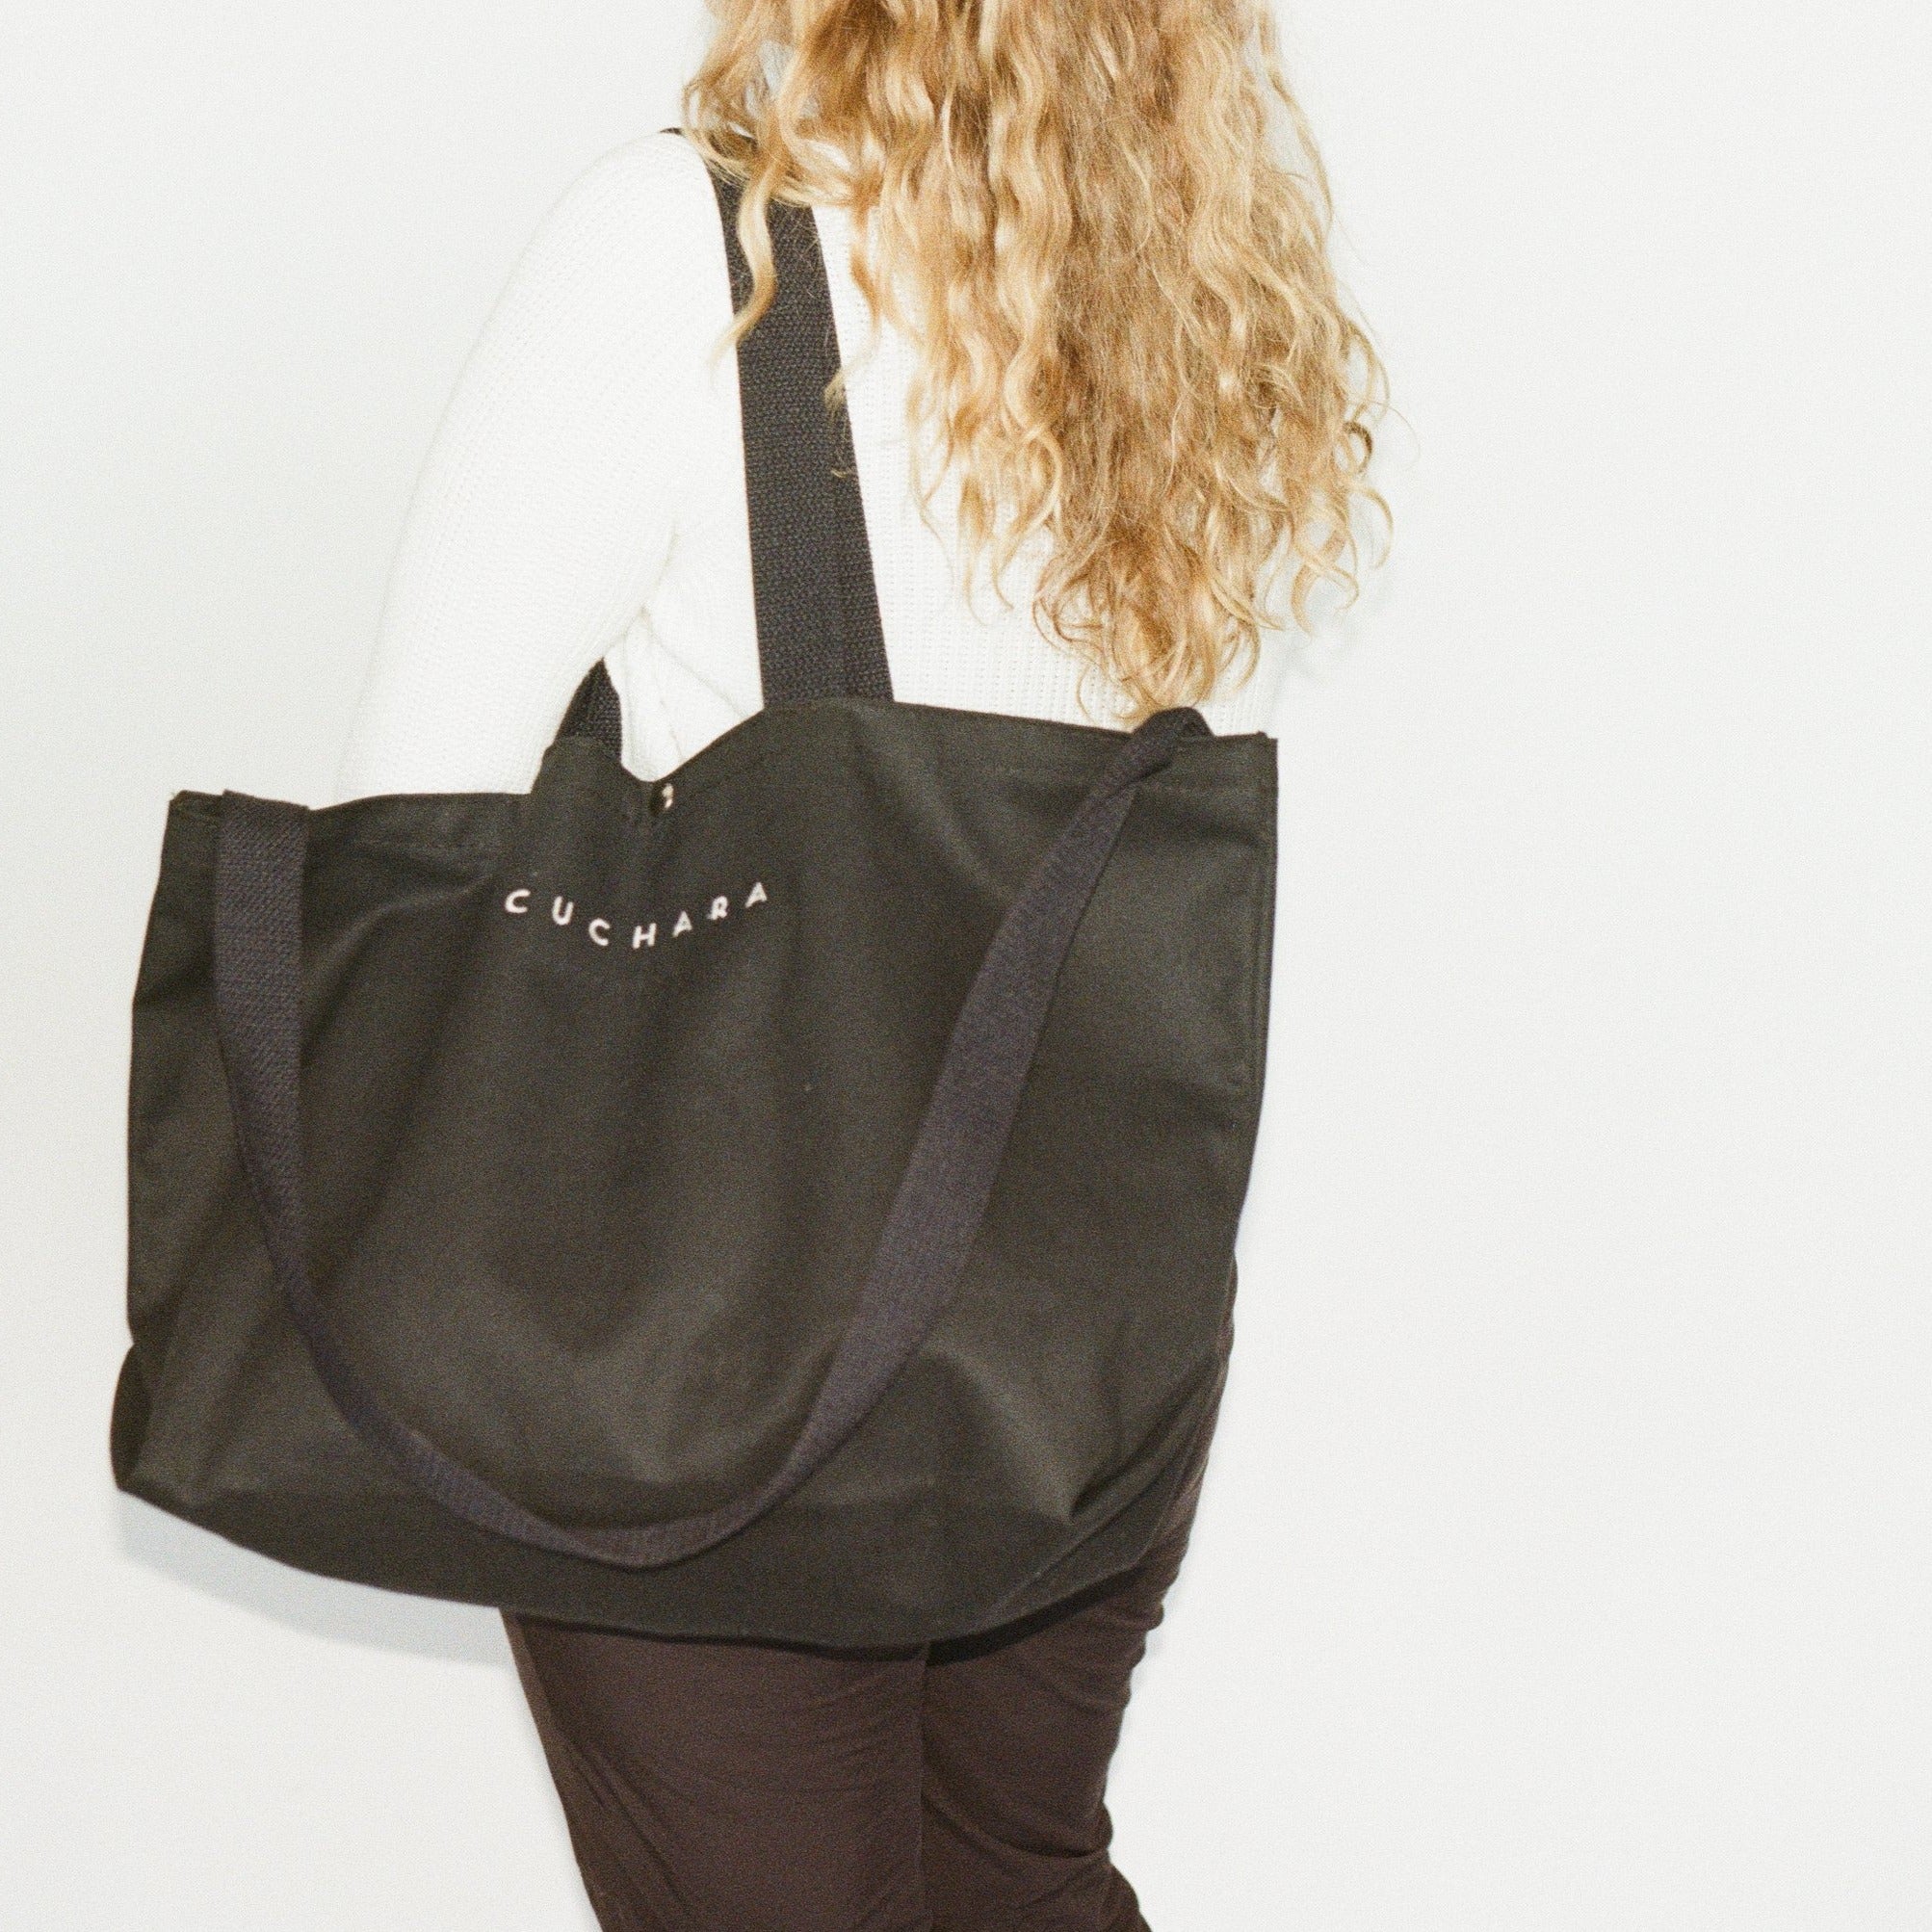 Heavy 15oz Cotton tote bag with Snap Closure in black on model